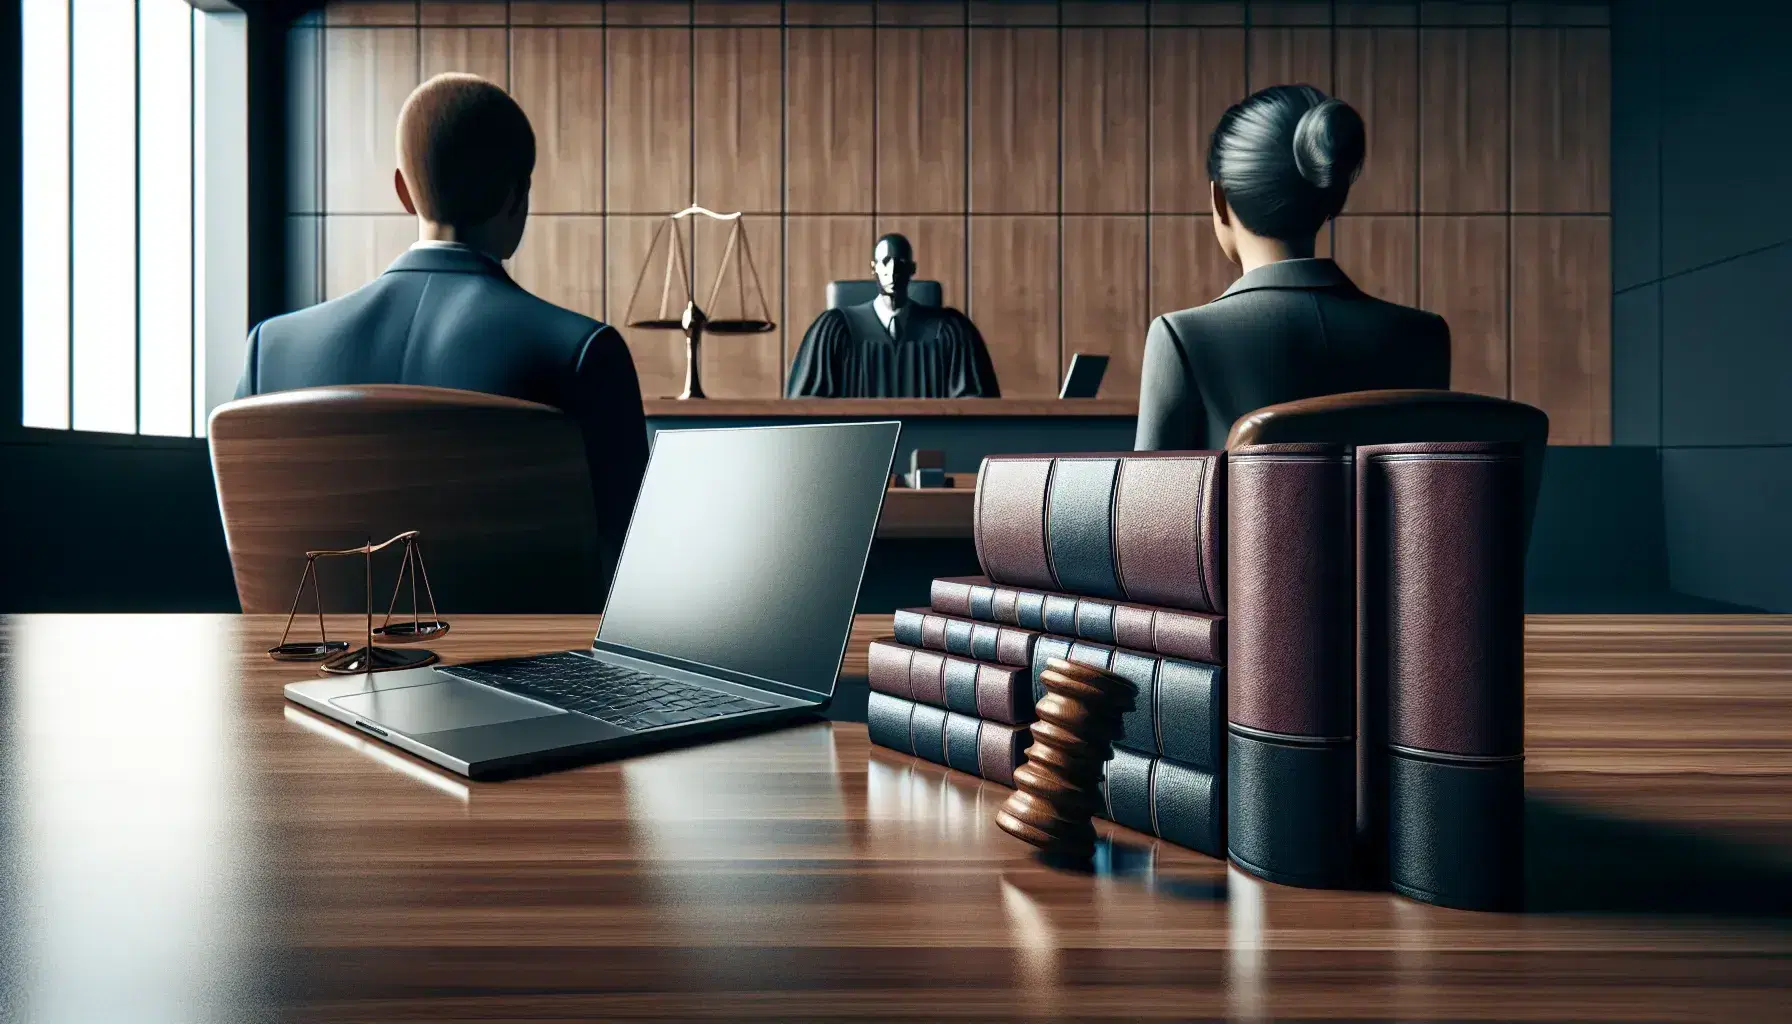 Modern courtroom with attorney's desk, legal books, laptop, and two professionals seated facing the judge's bench in a well-lit, formal setting.